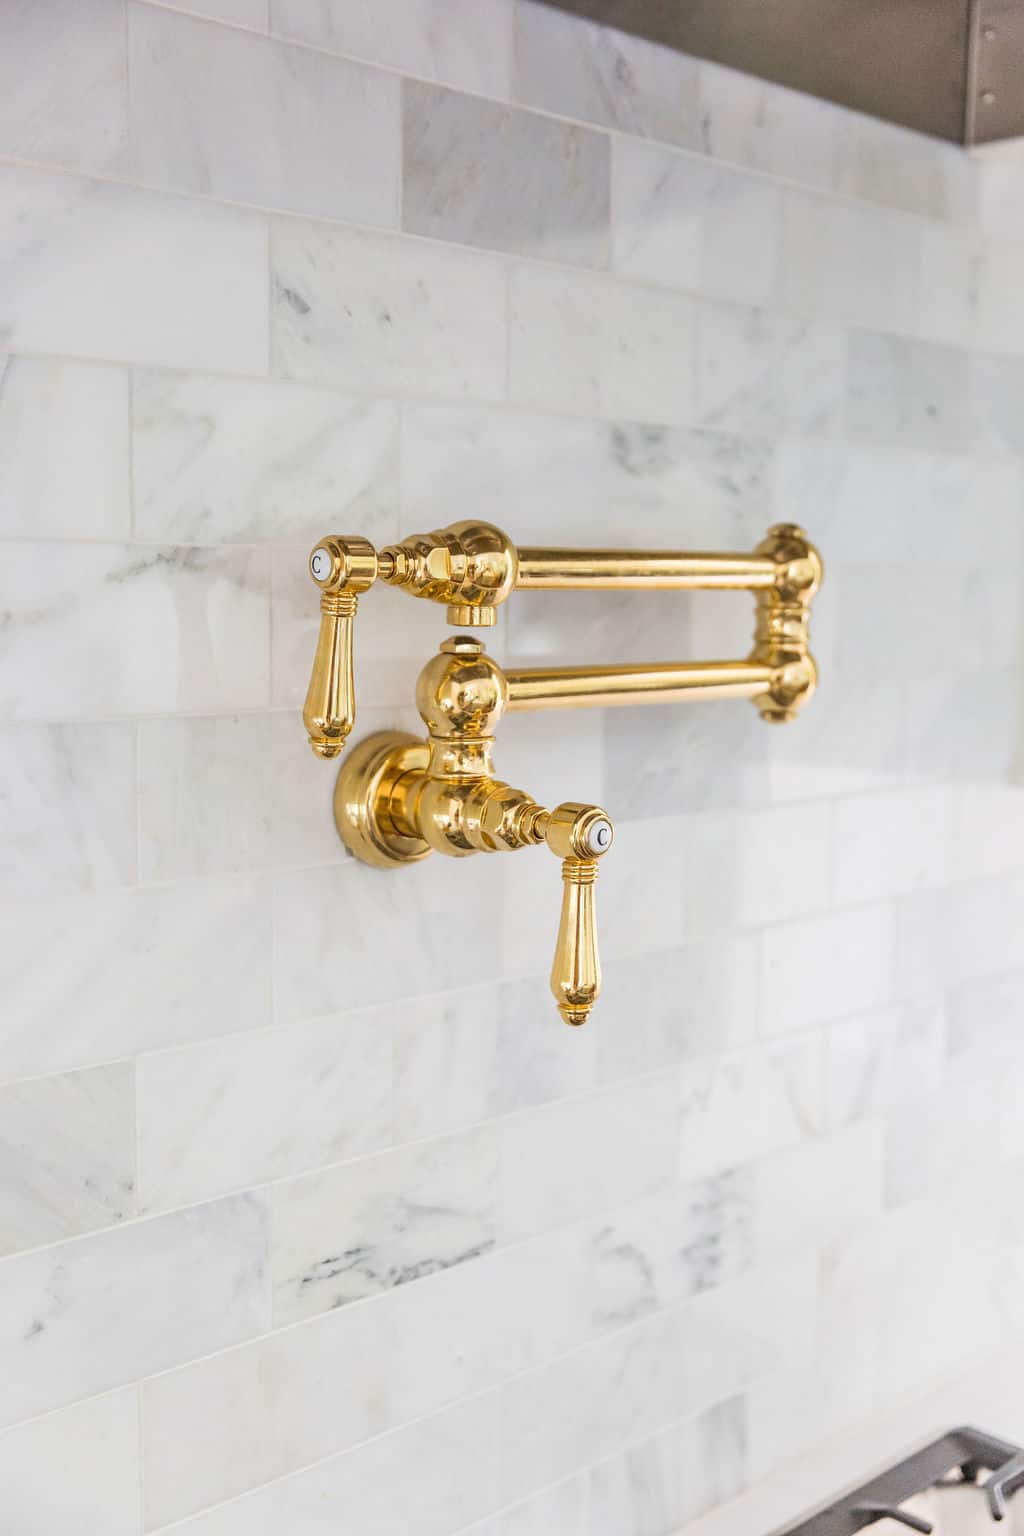 Nicholas Design Build | A remodeled kitchen with a gold faucet on the wall.